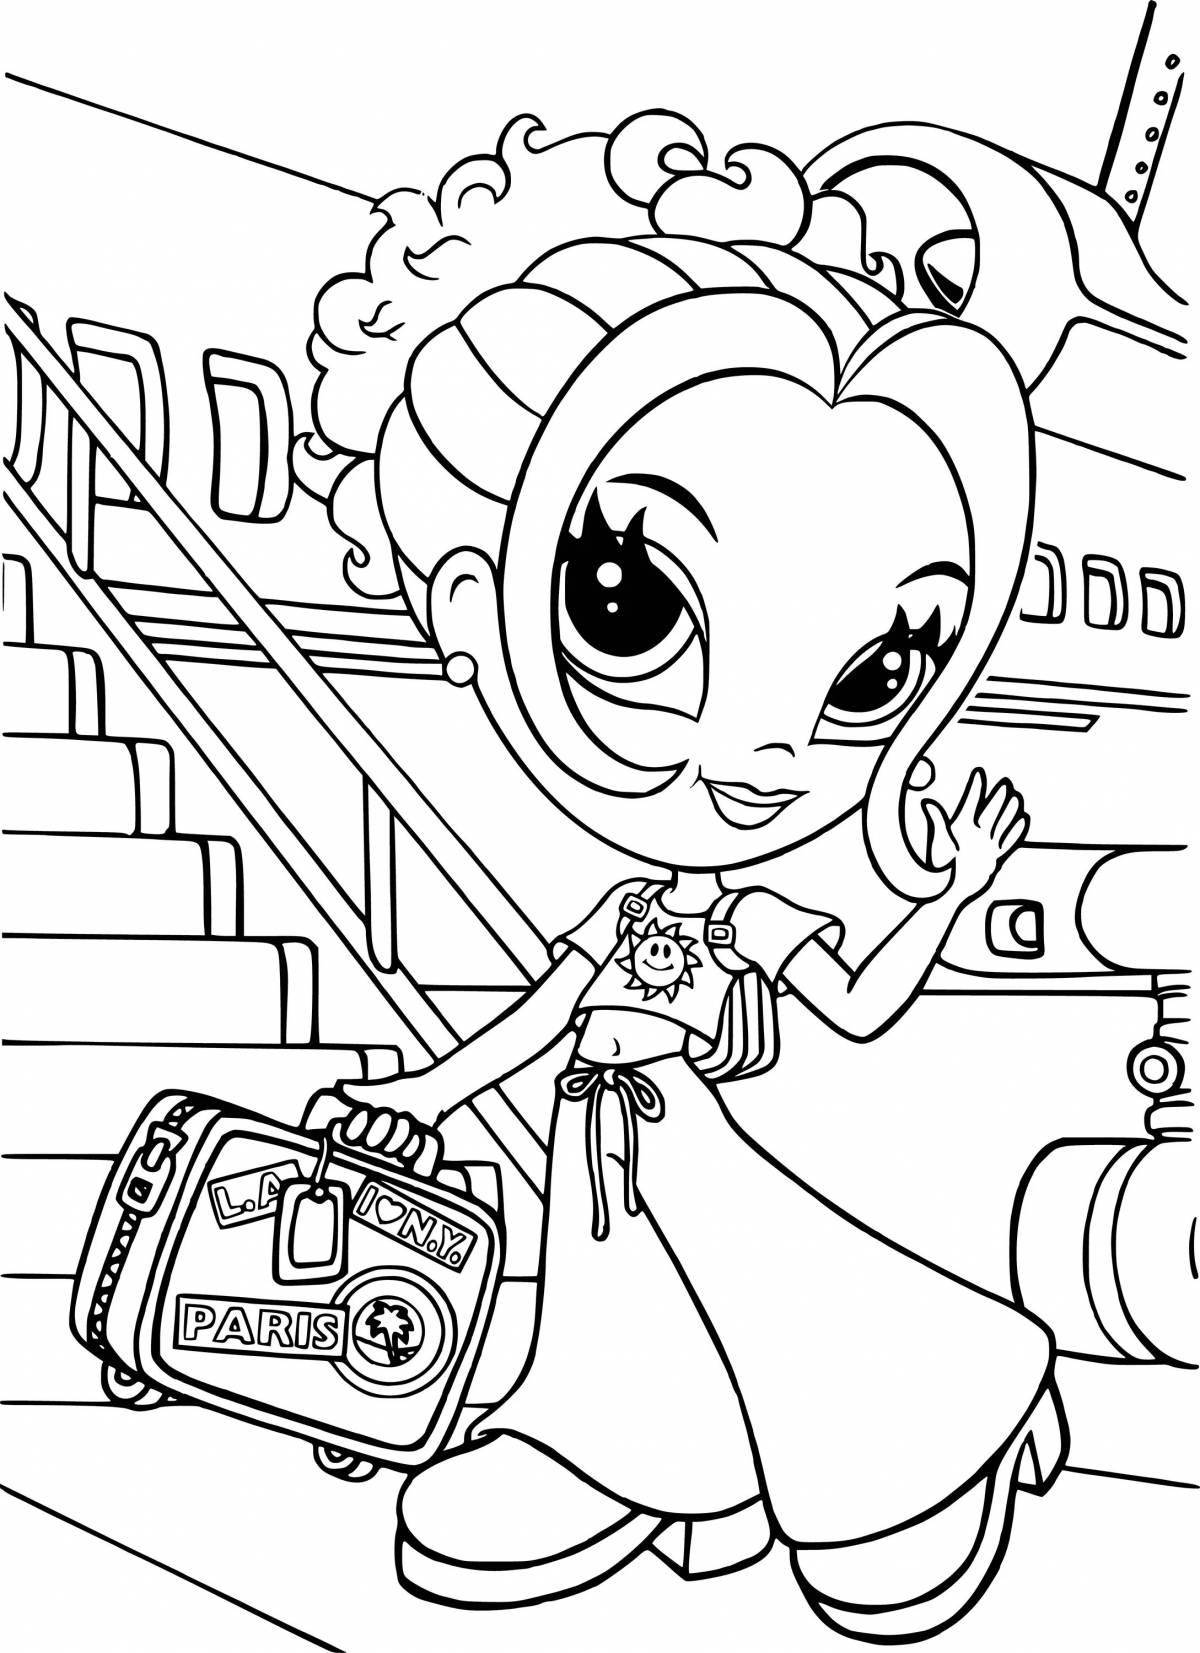 Great coloring book for girls 7 years old